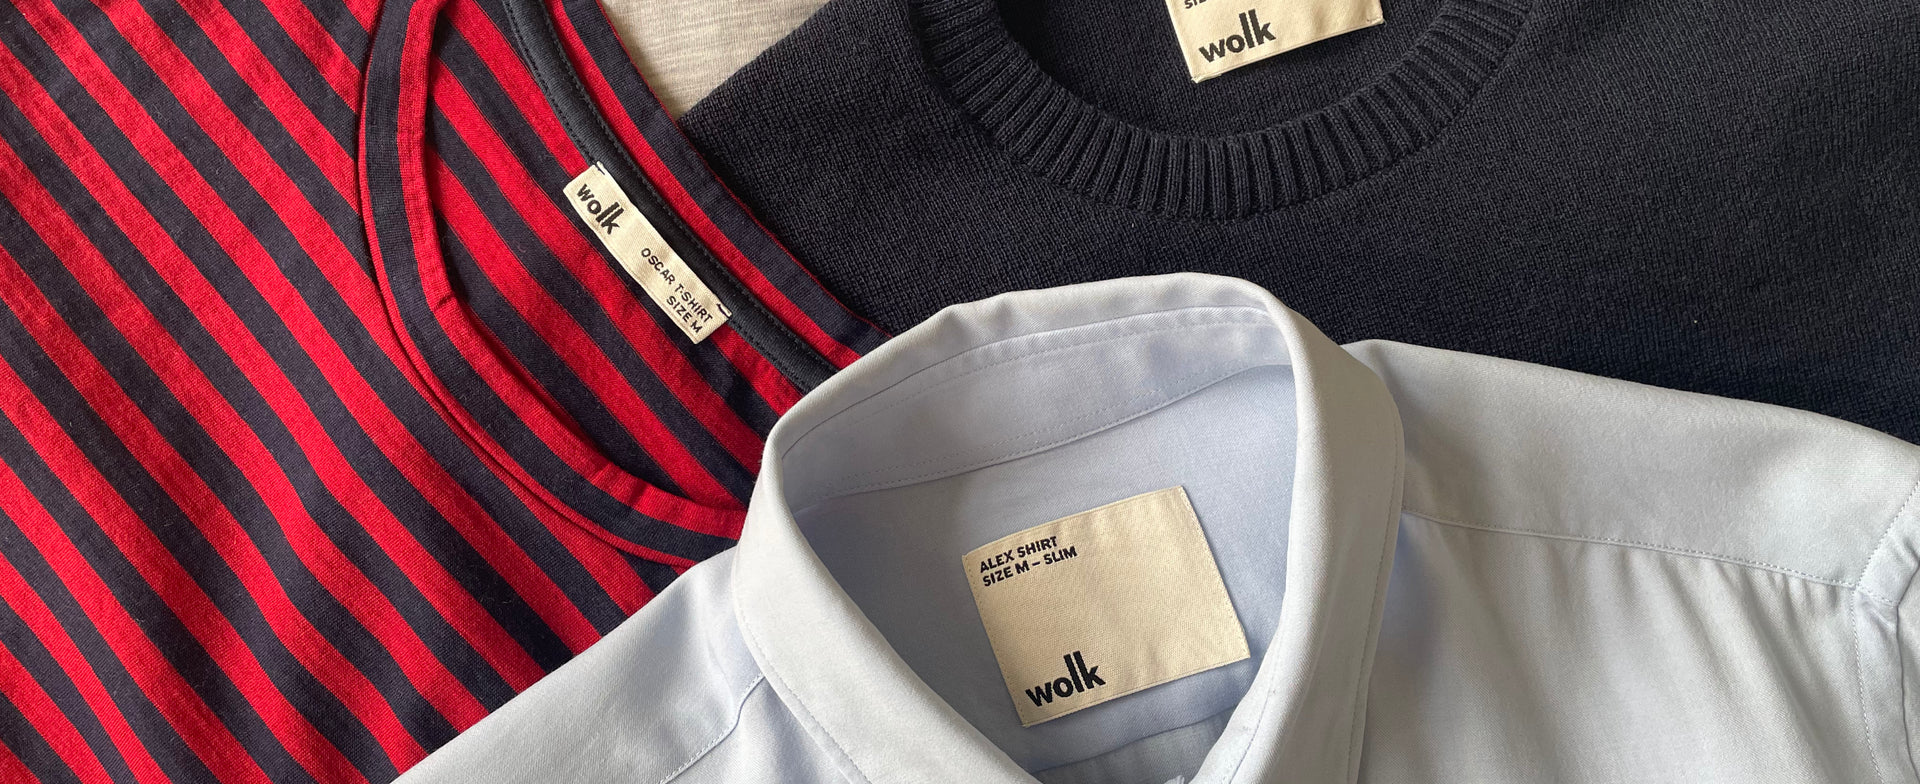 wolk merino wool apparel care instructions for knitwear T-shirts and shirts